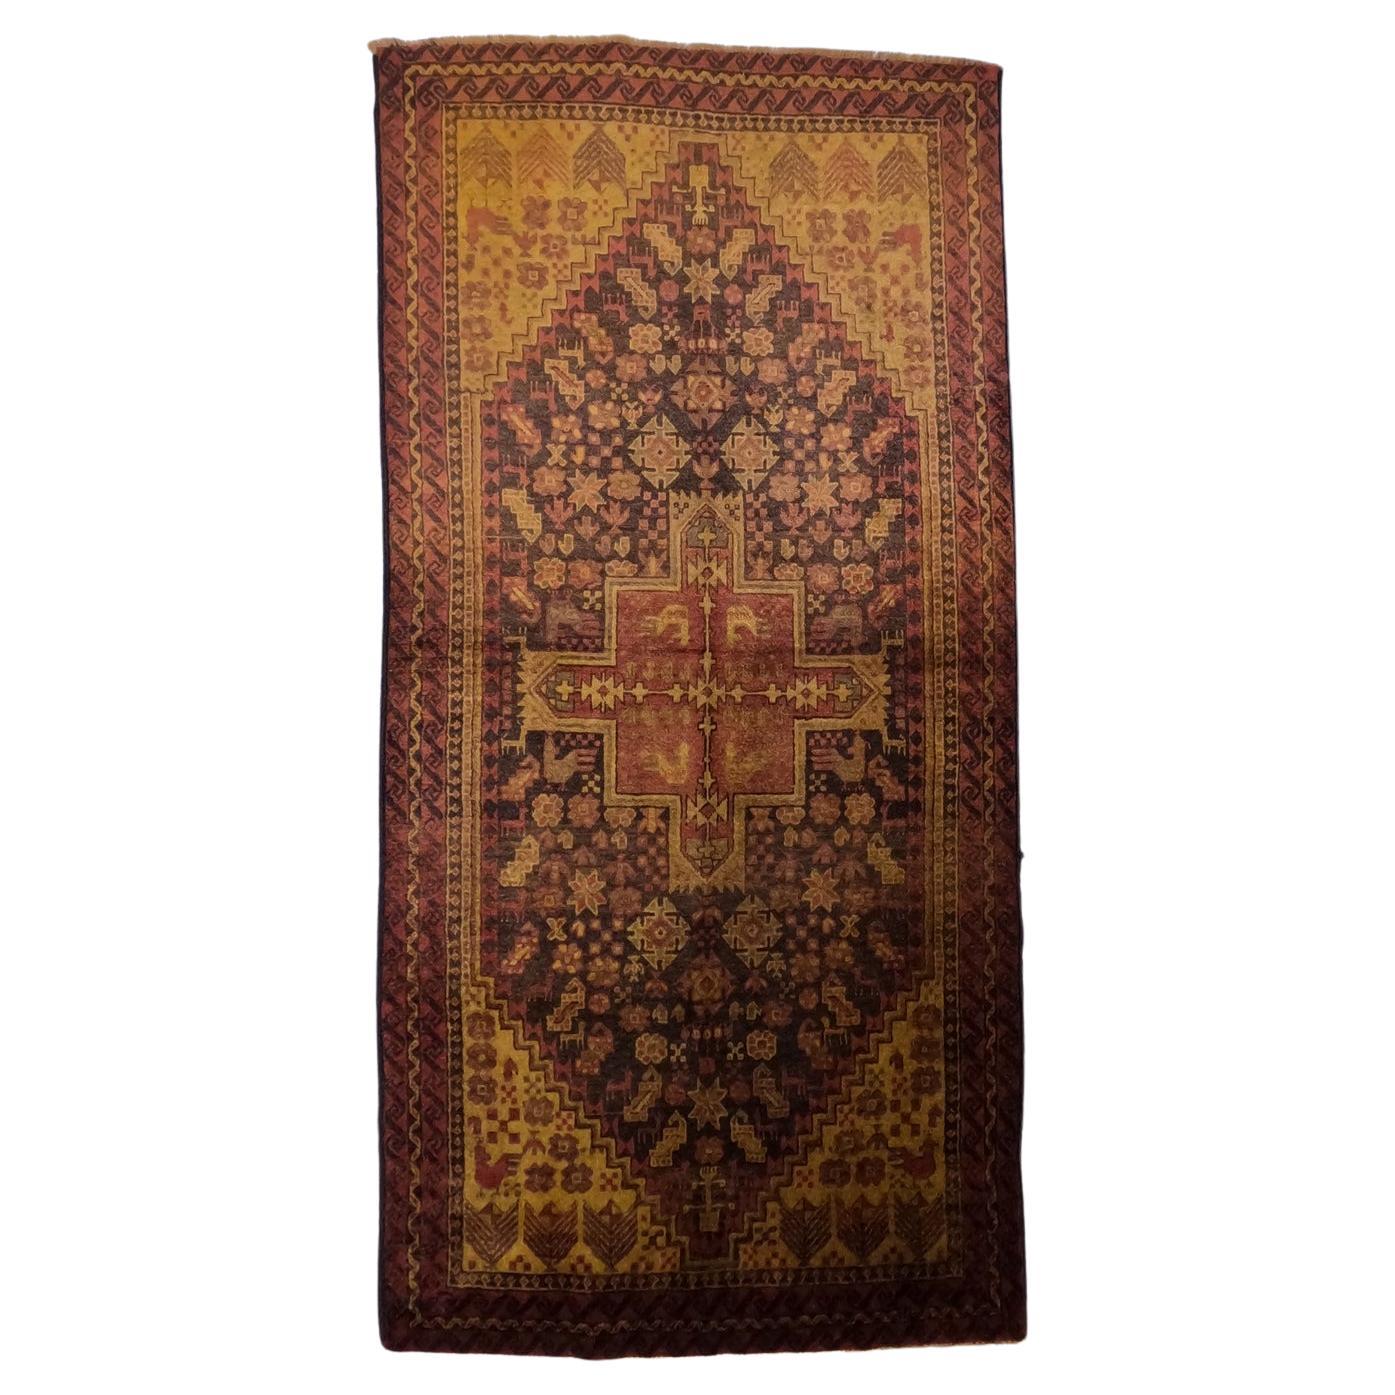 Camel and Lamb Wool Pashimineh Carpet Vintage Semi Antique Baluch For Sale